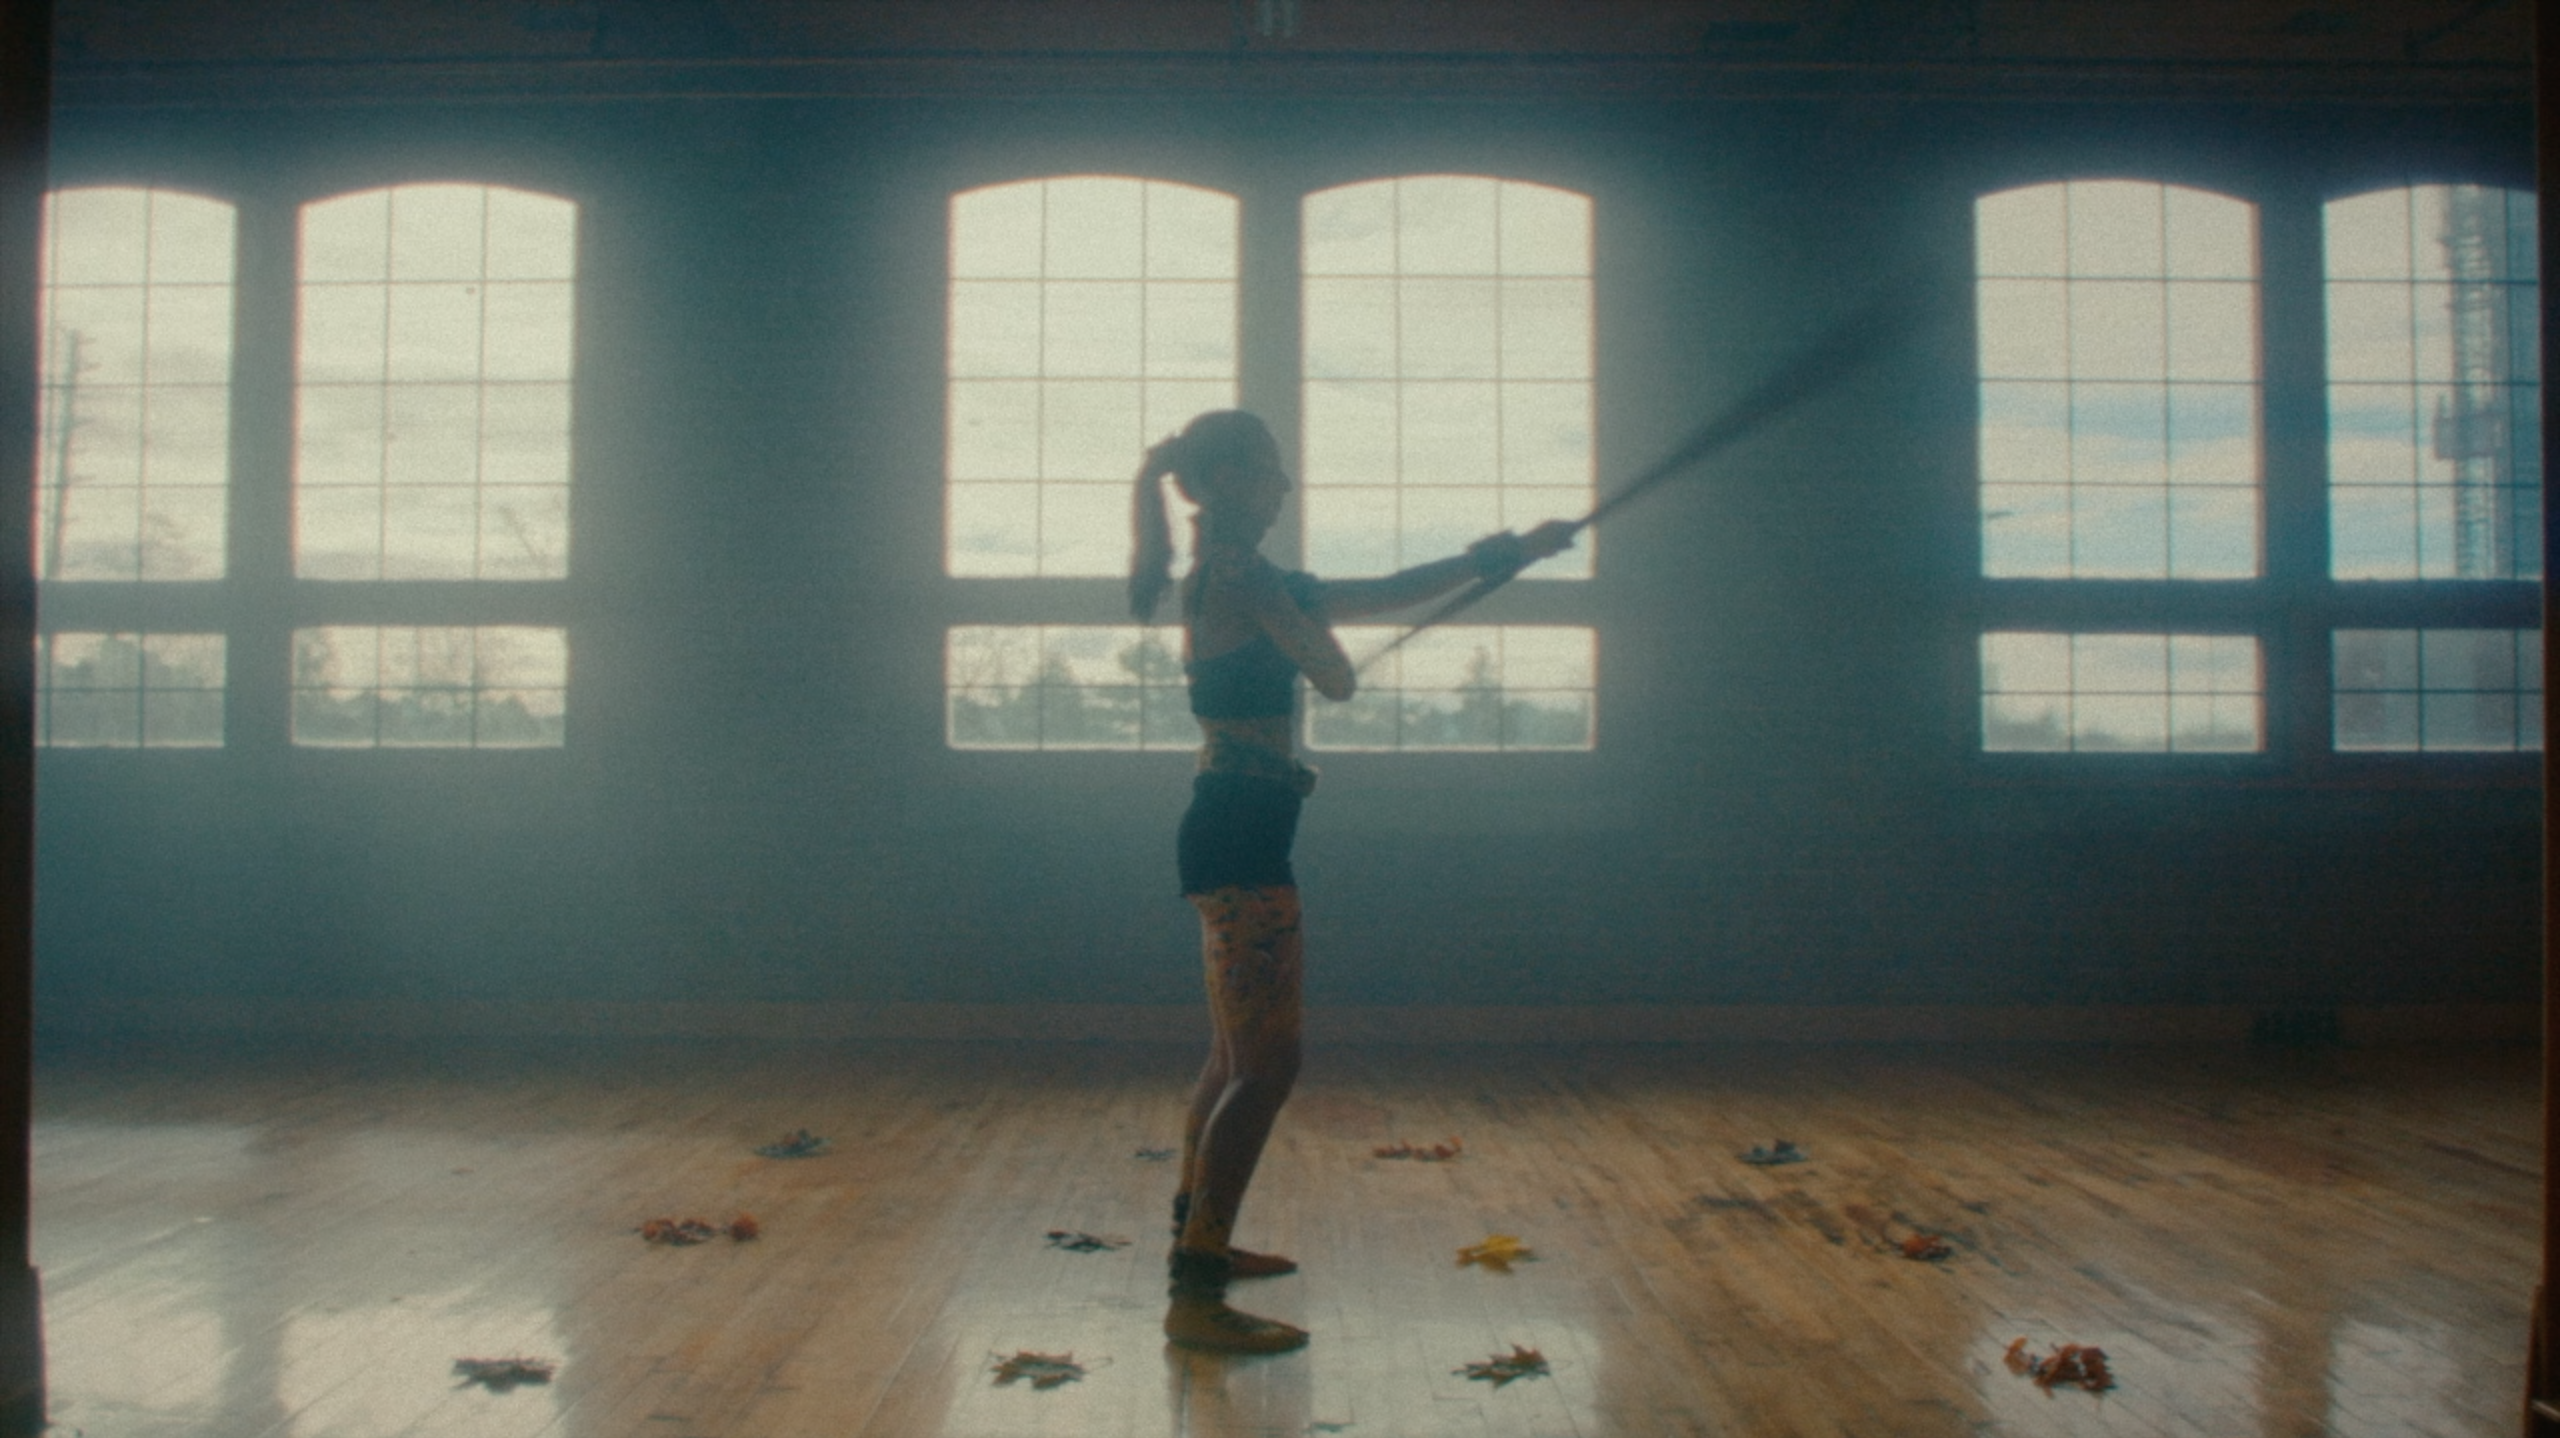 A dancer is standing in an open space with large windows behind them. The artist is facing the right side and moving a long wooden dowel out in front of her.